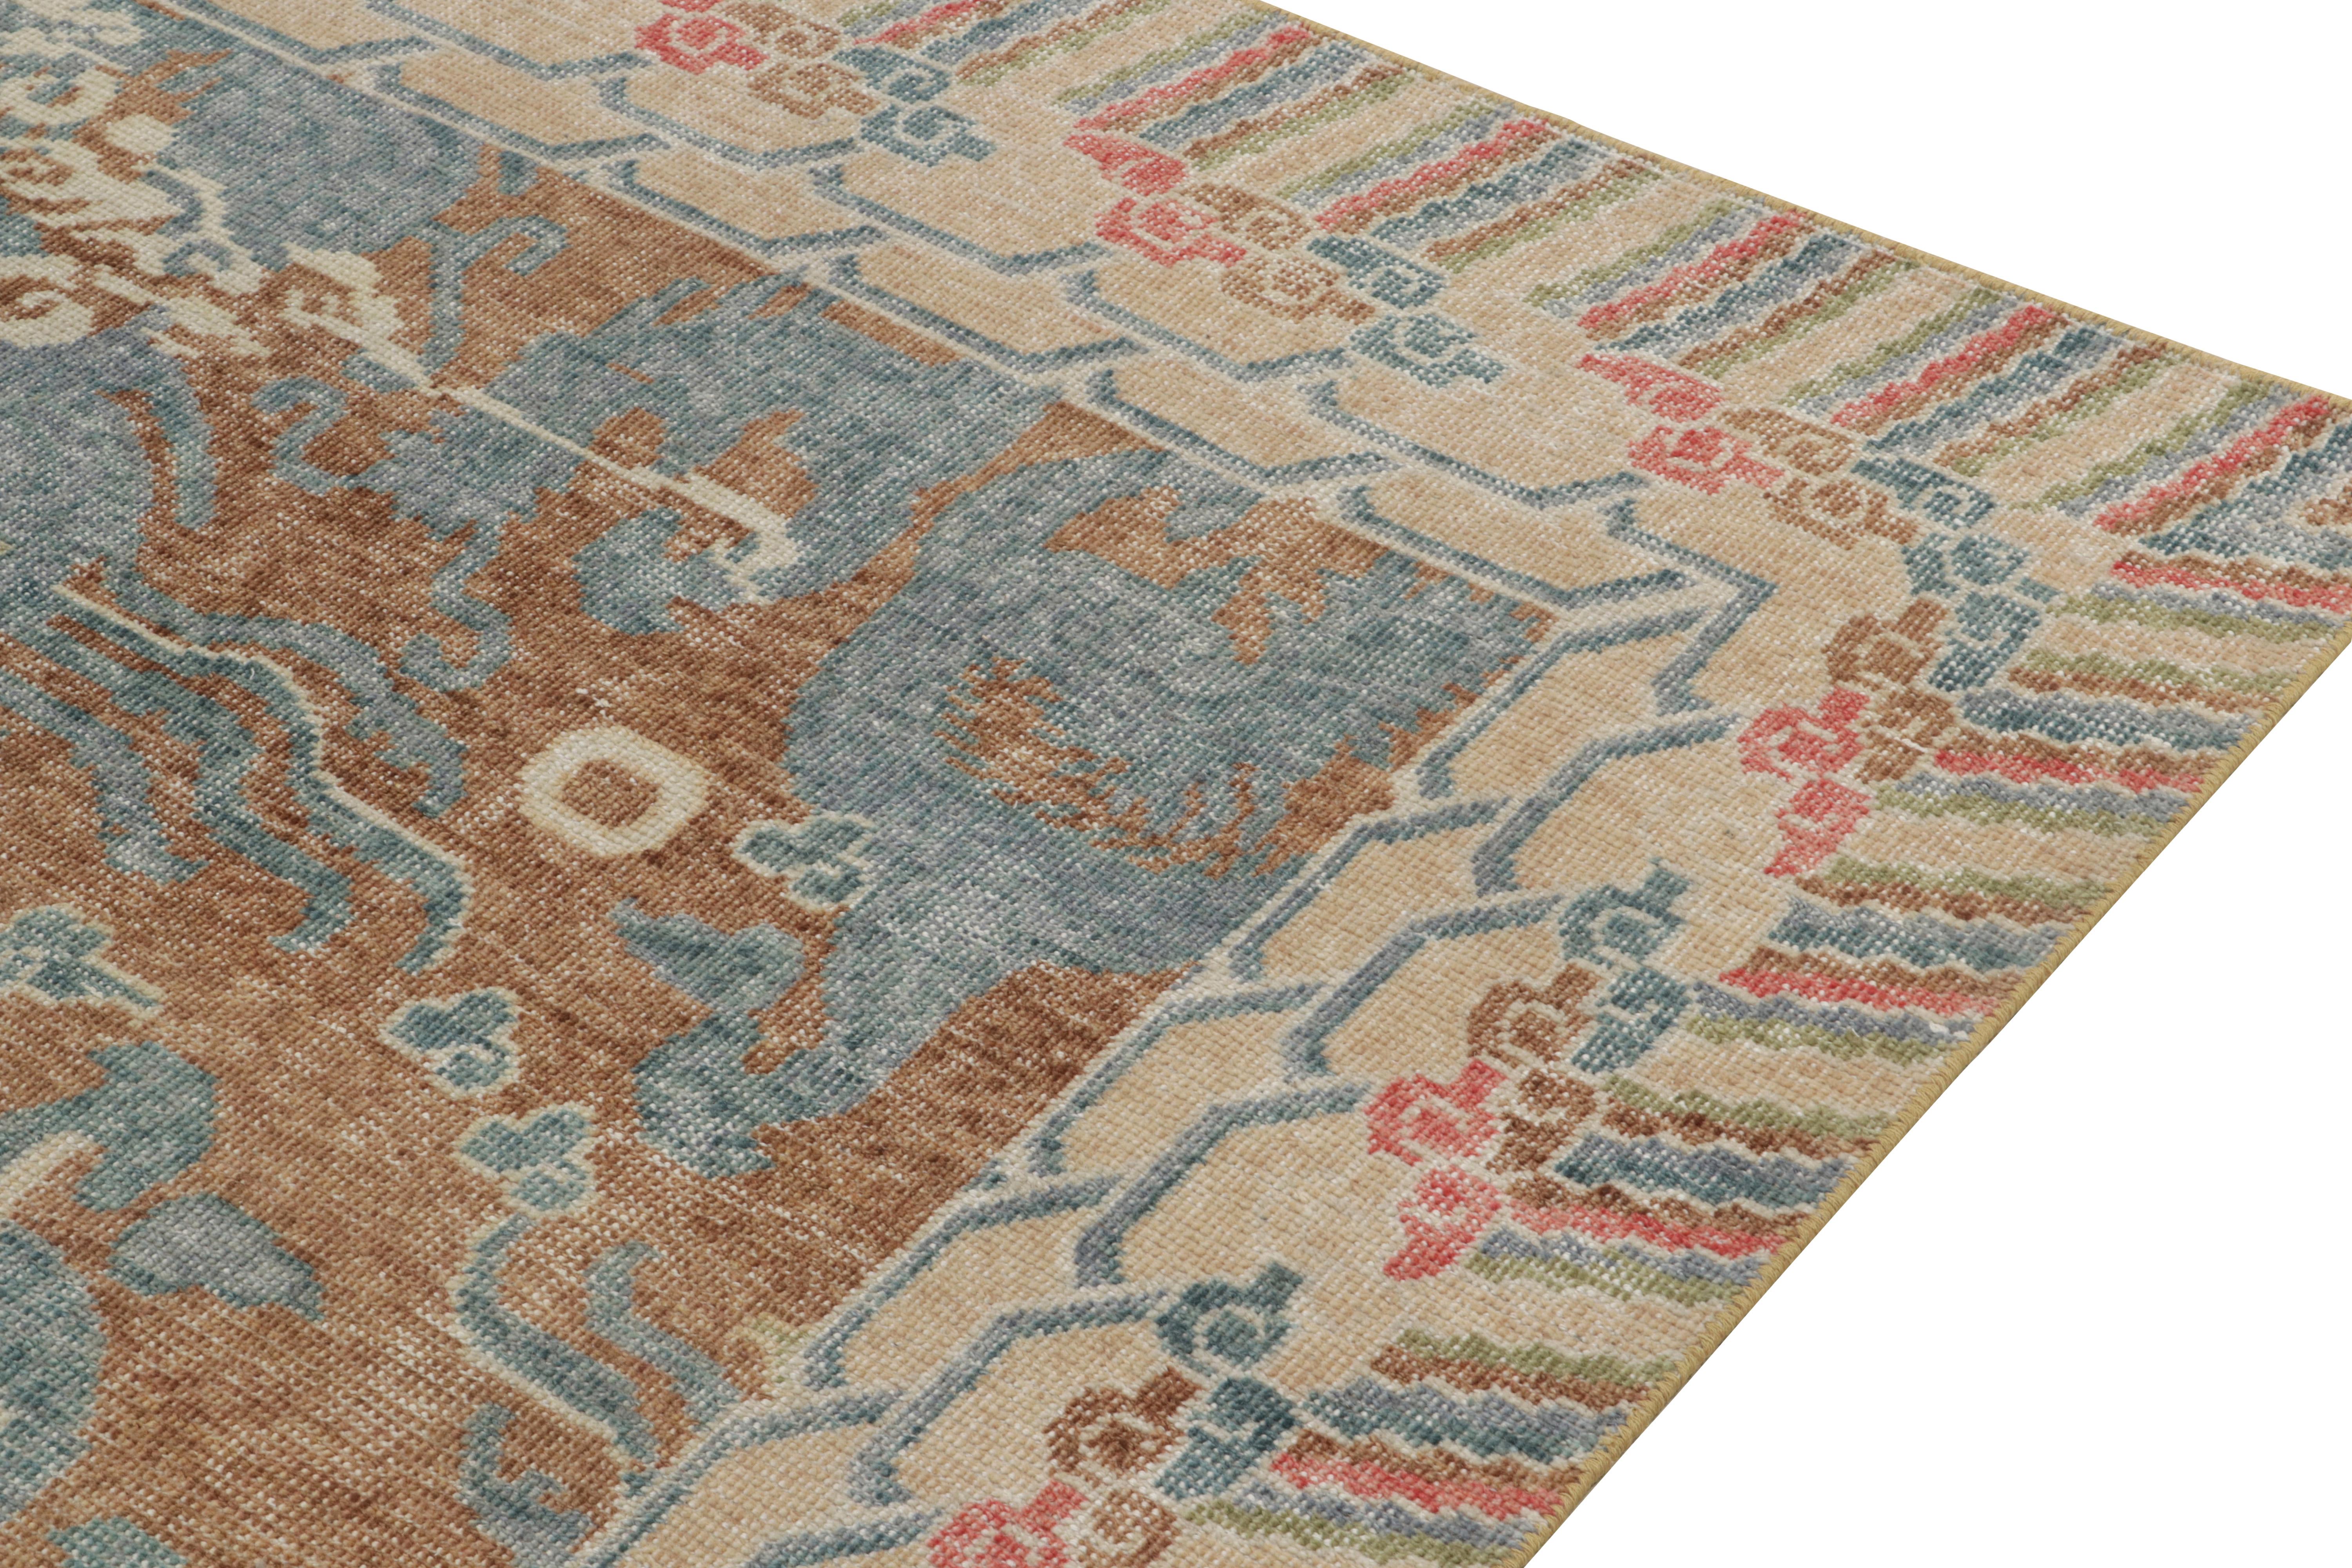 Hand-Knotted Rug & Kilim's Distressed Style Dragon Rug in Brown, Blue, Red Pictorials For Sale